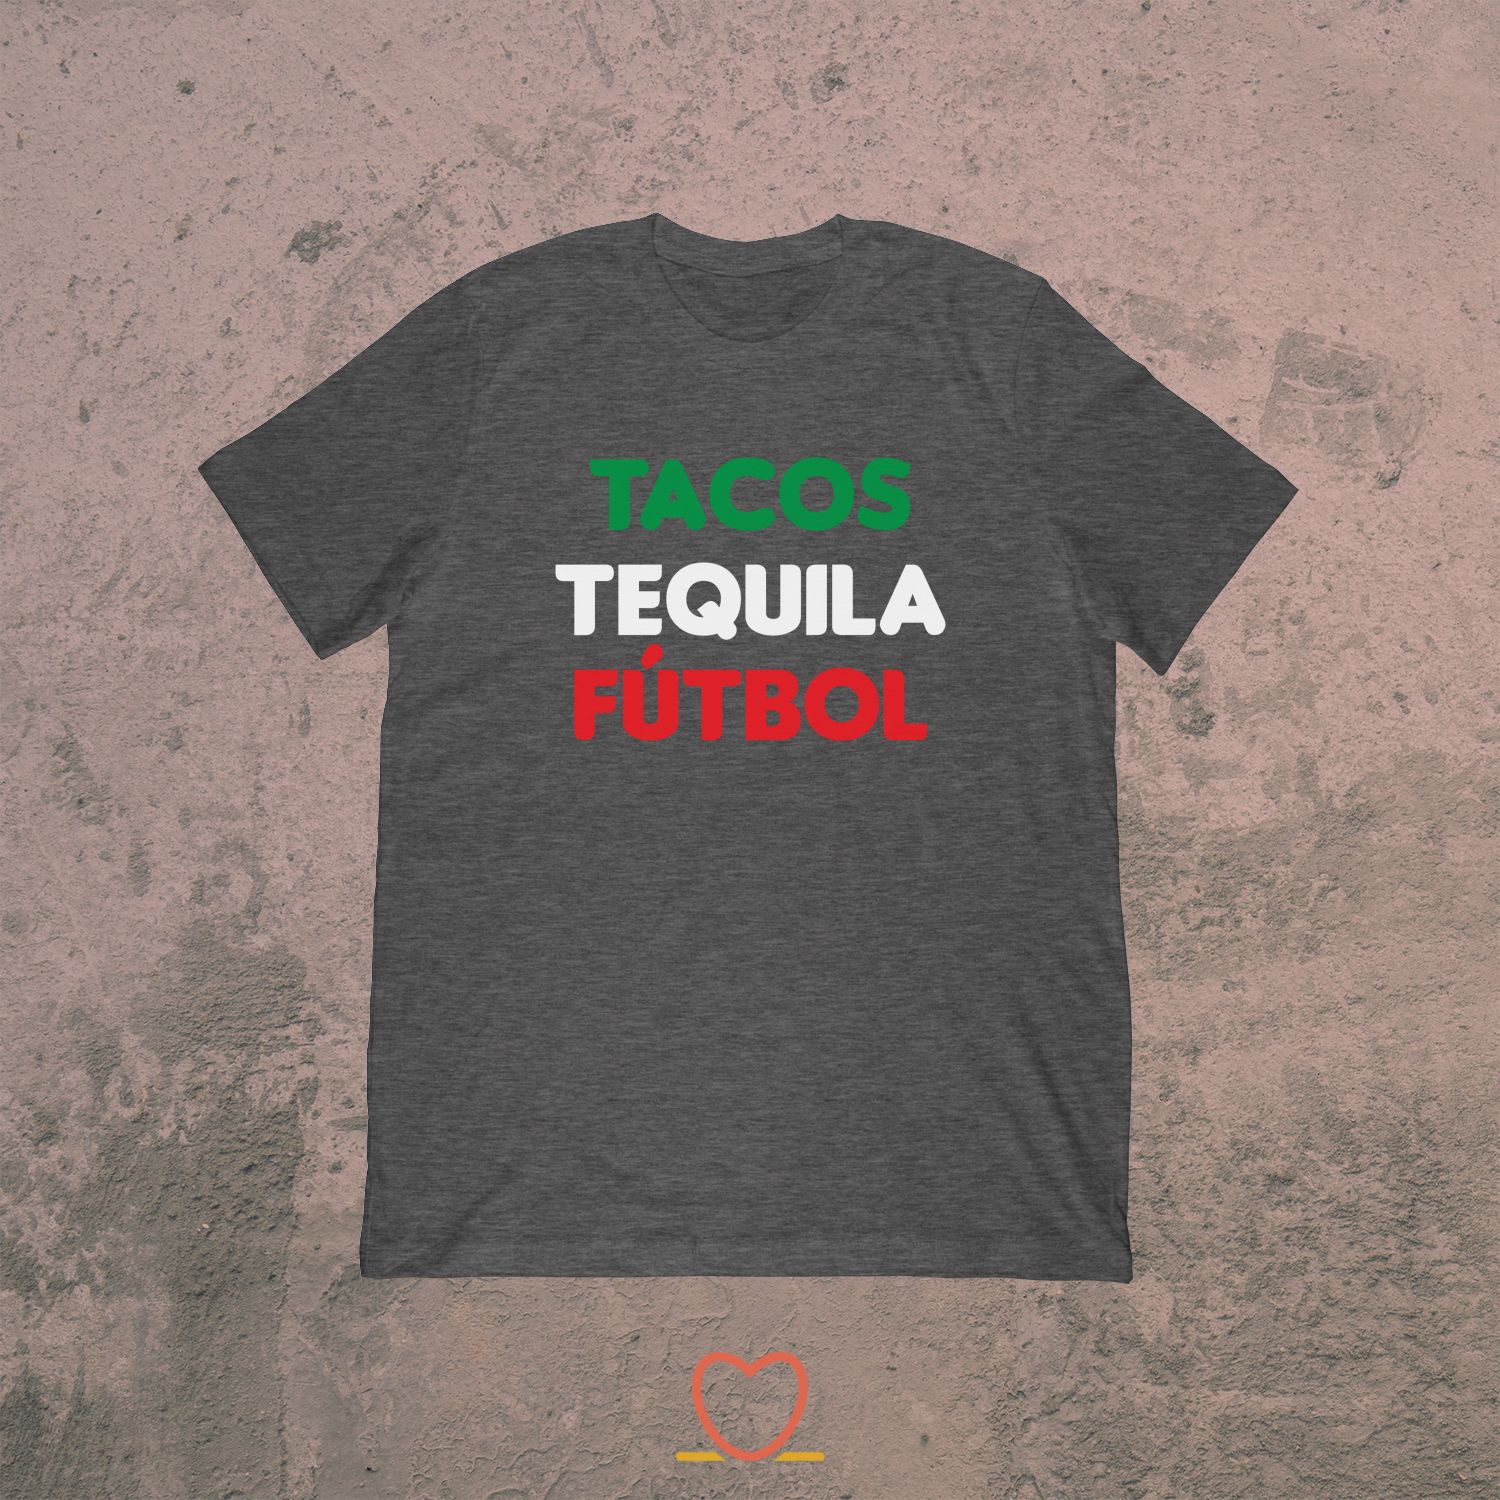 Tacos Tequila Fútbol – Mexican Soccer shirt Tee